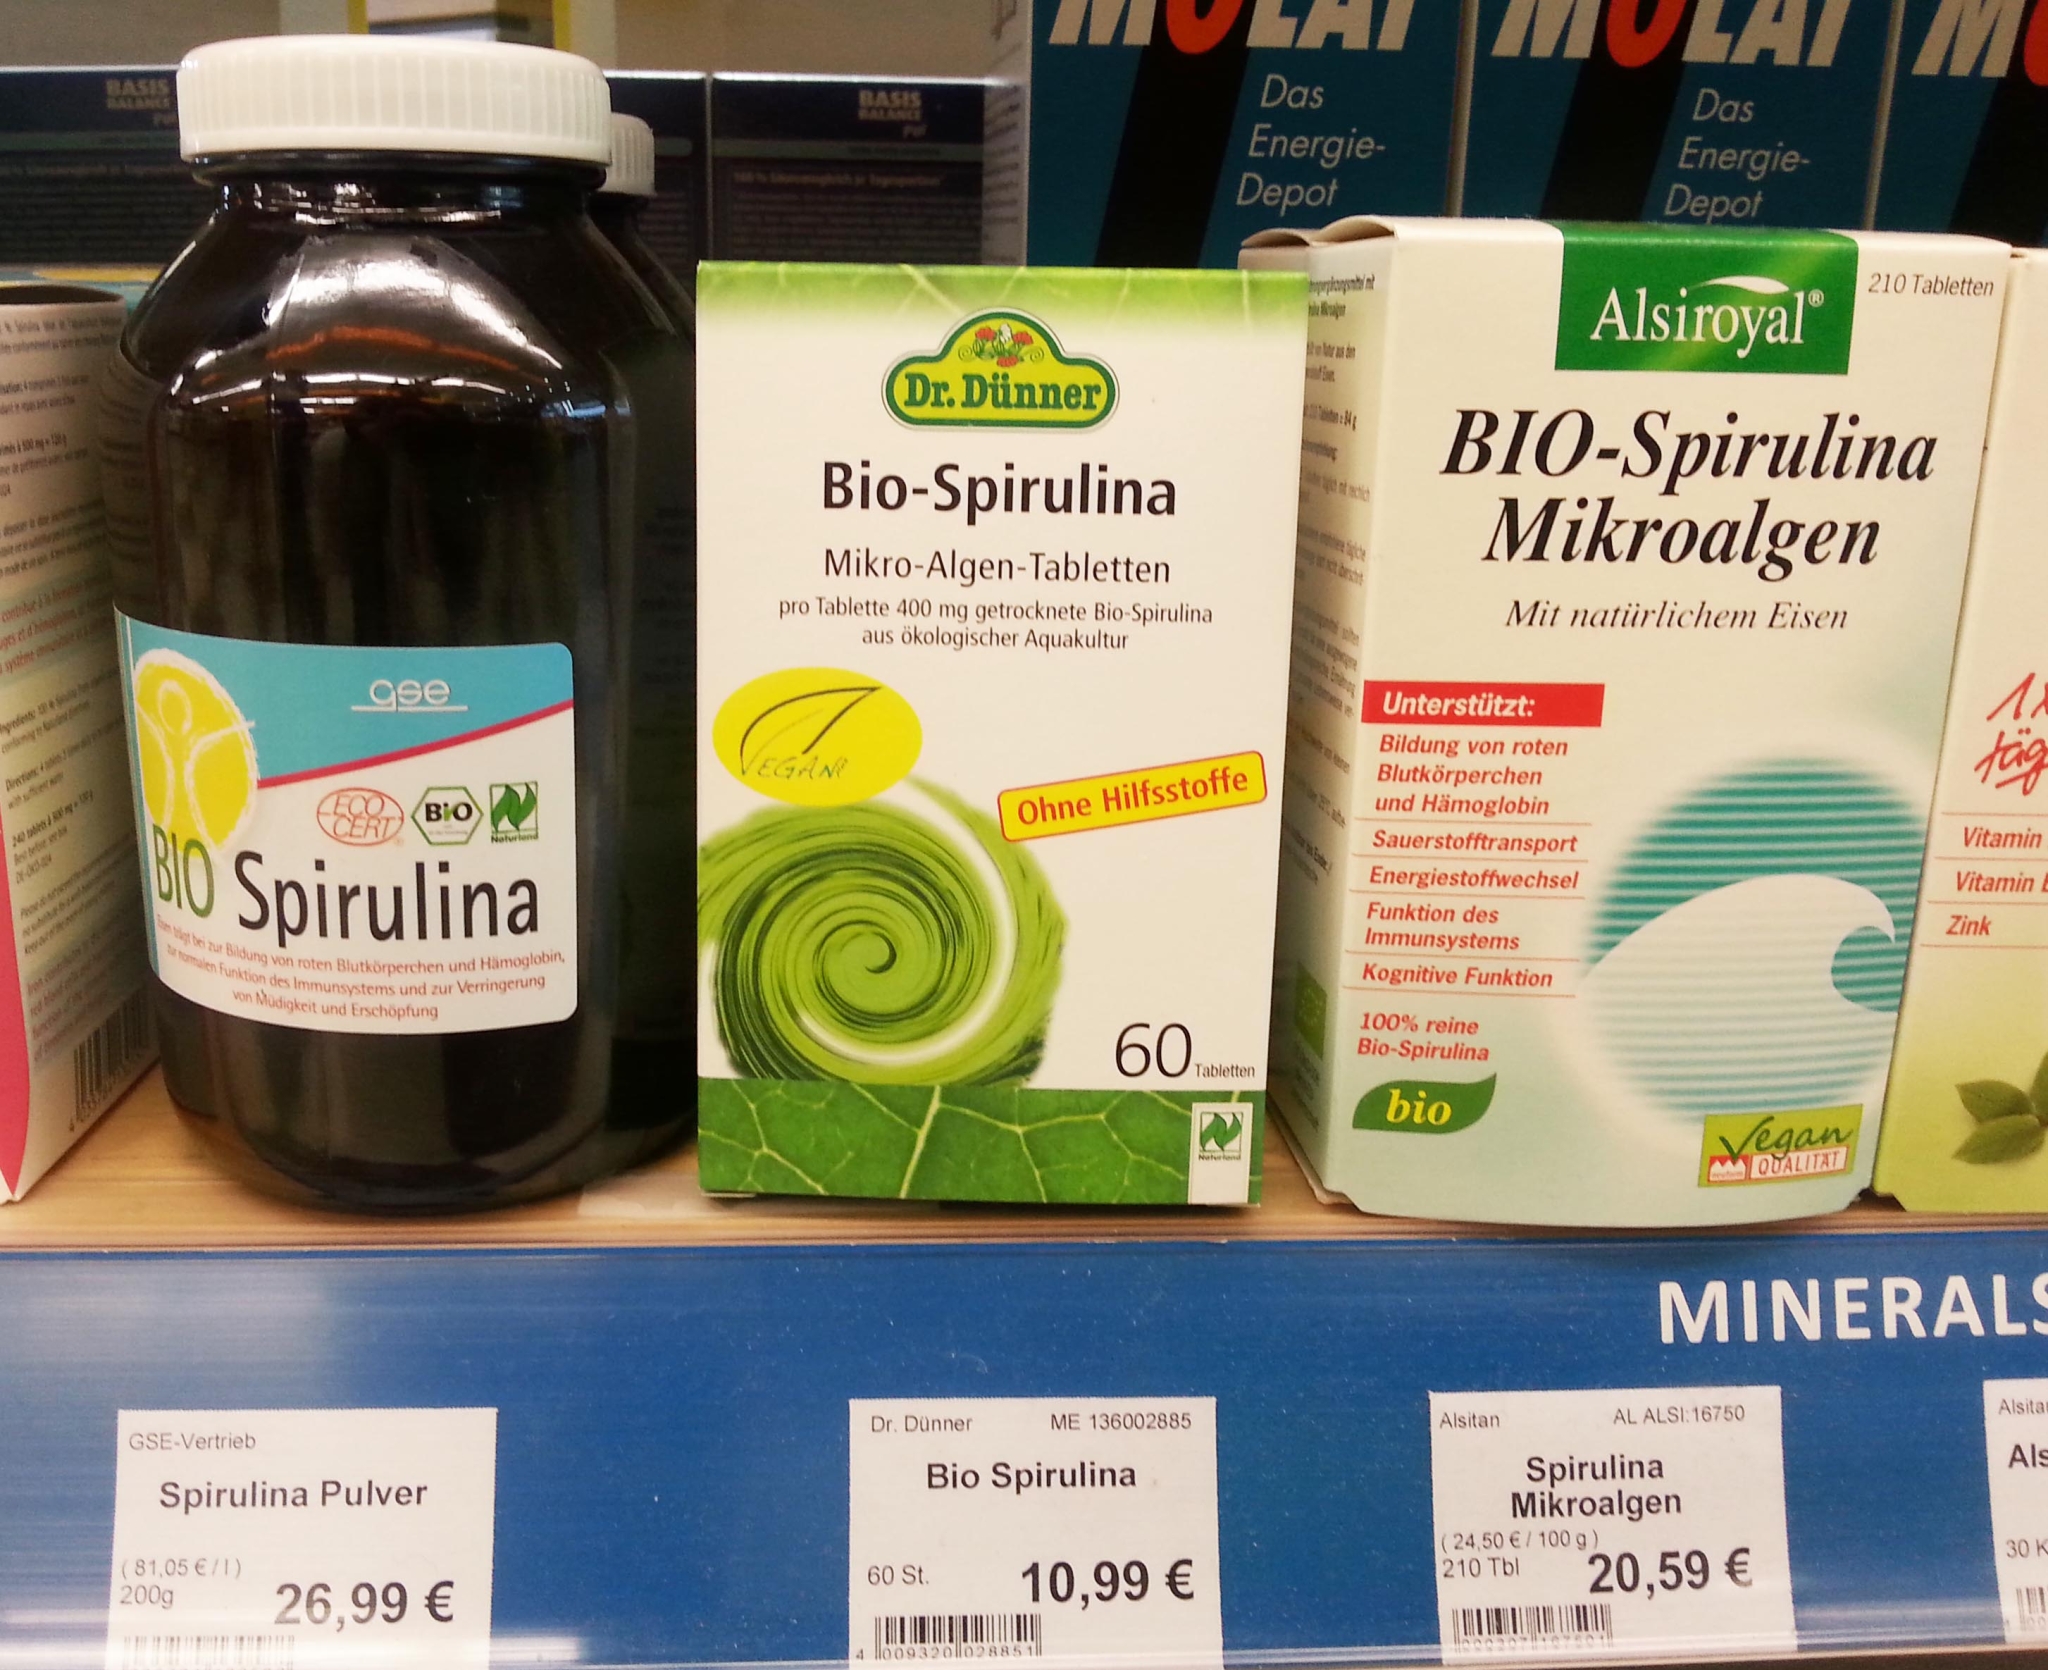 The photo shows Spirulina products in a supermarket shelf.